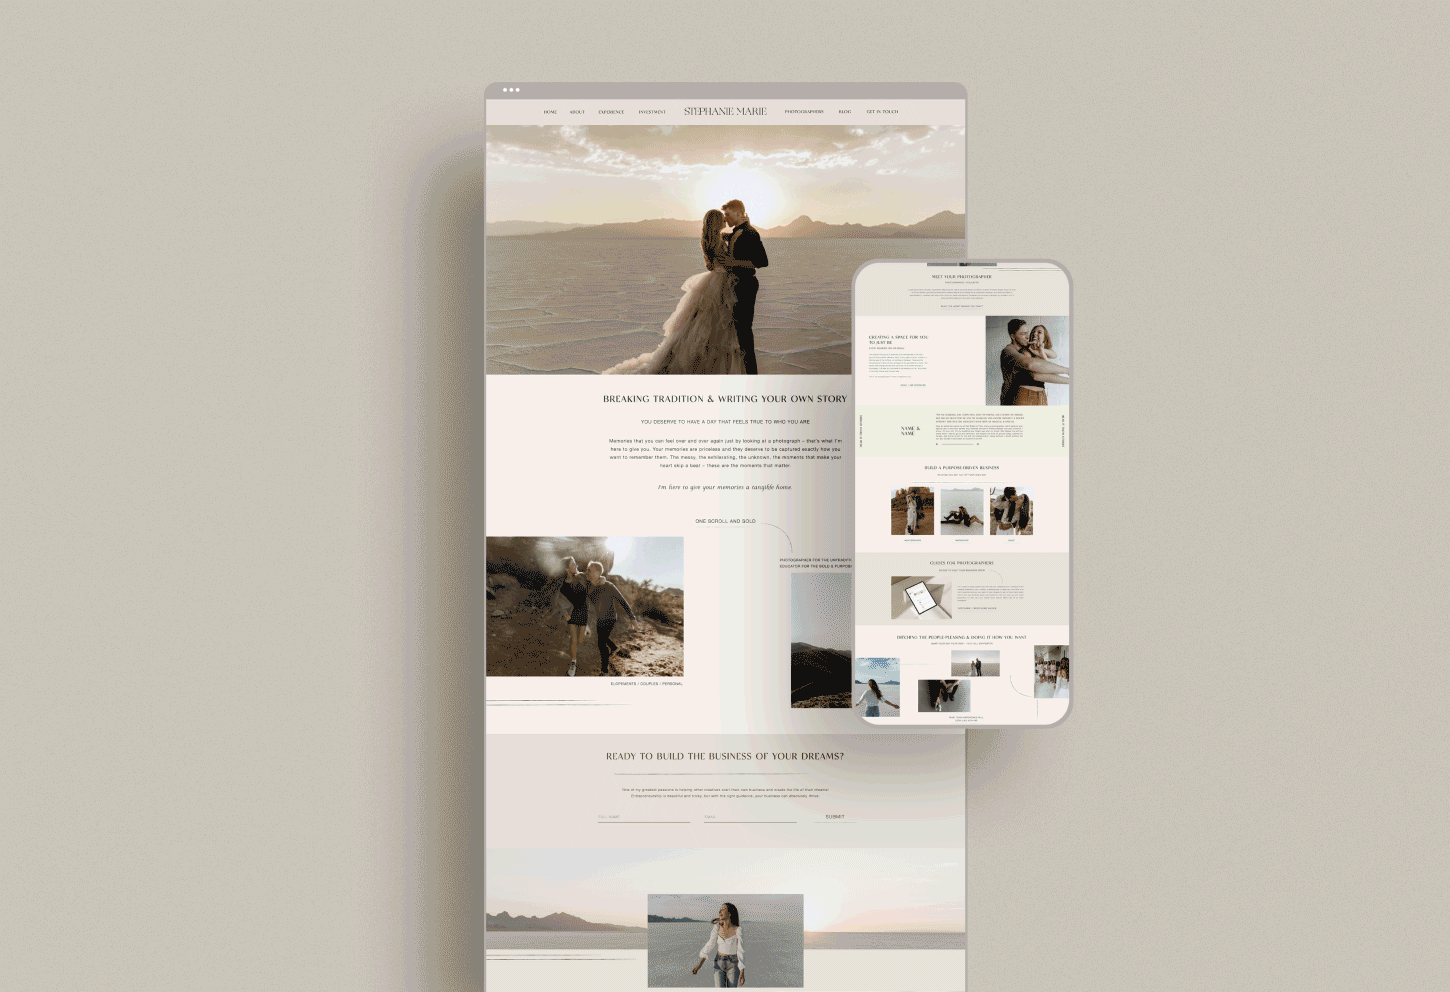 Modern luxury branding and website design for small businesses